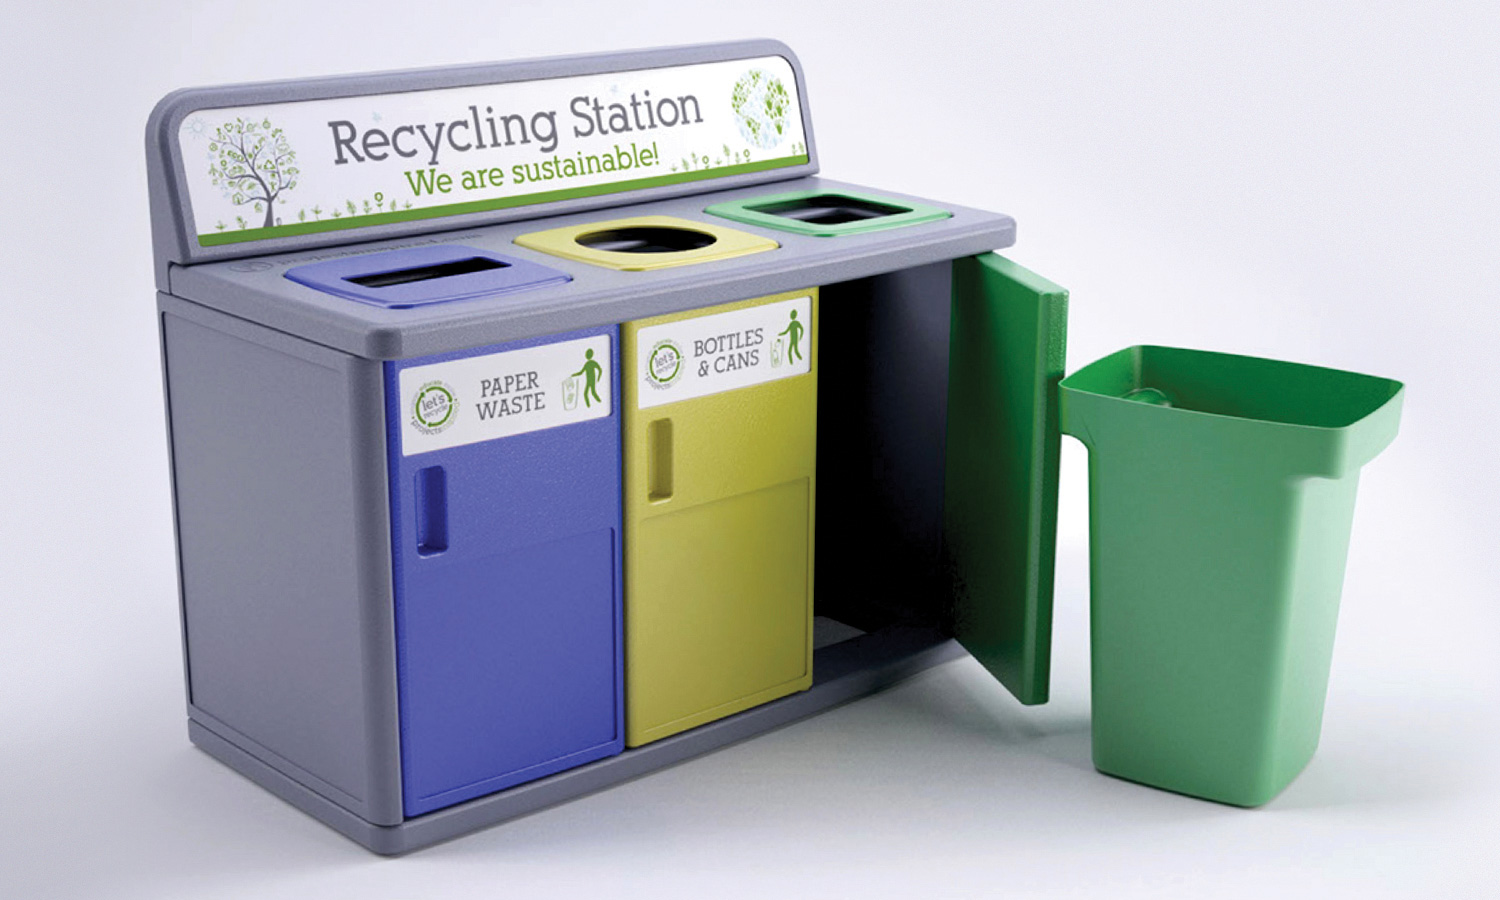 Projects Inspired - Recycling station